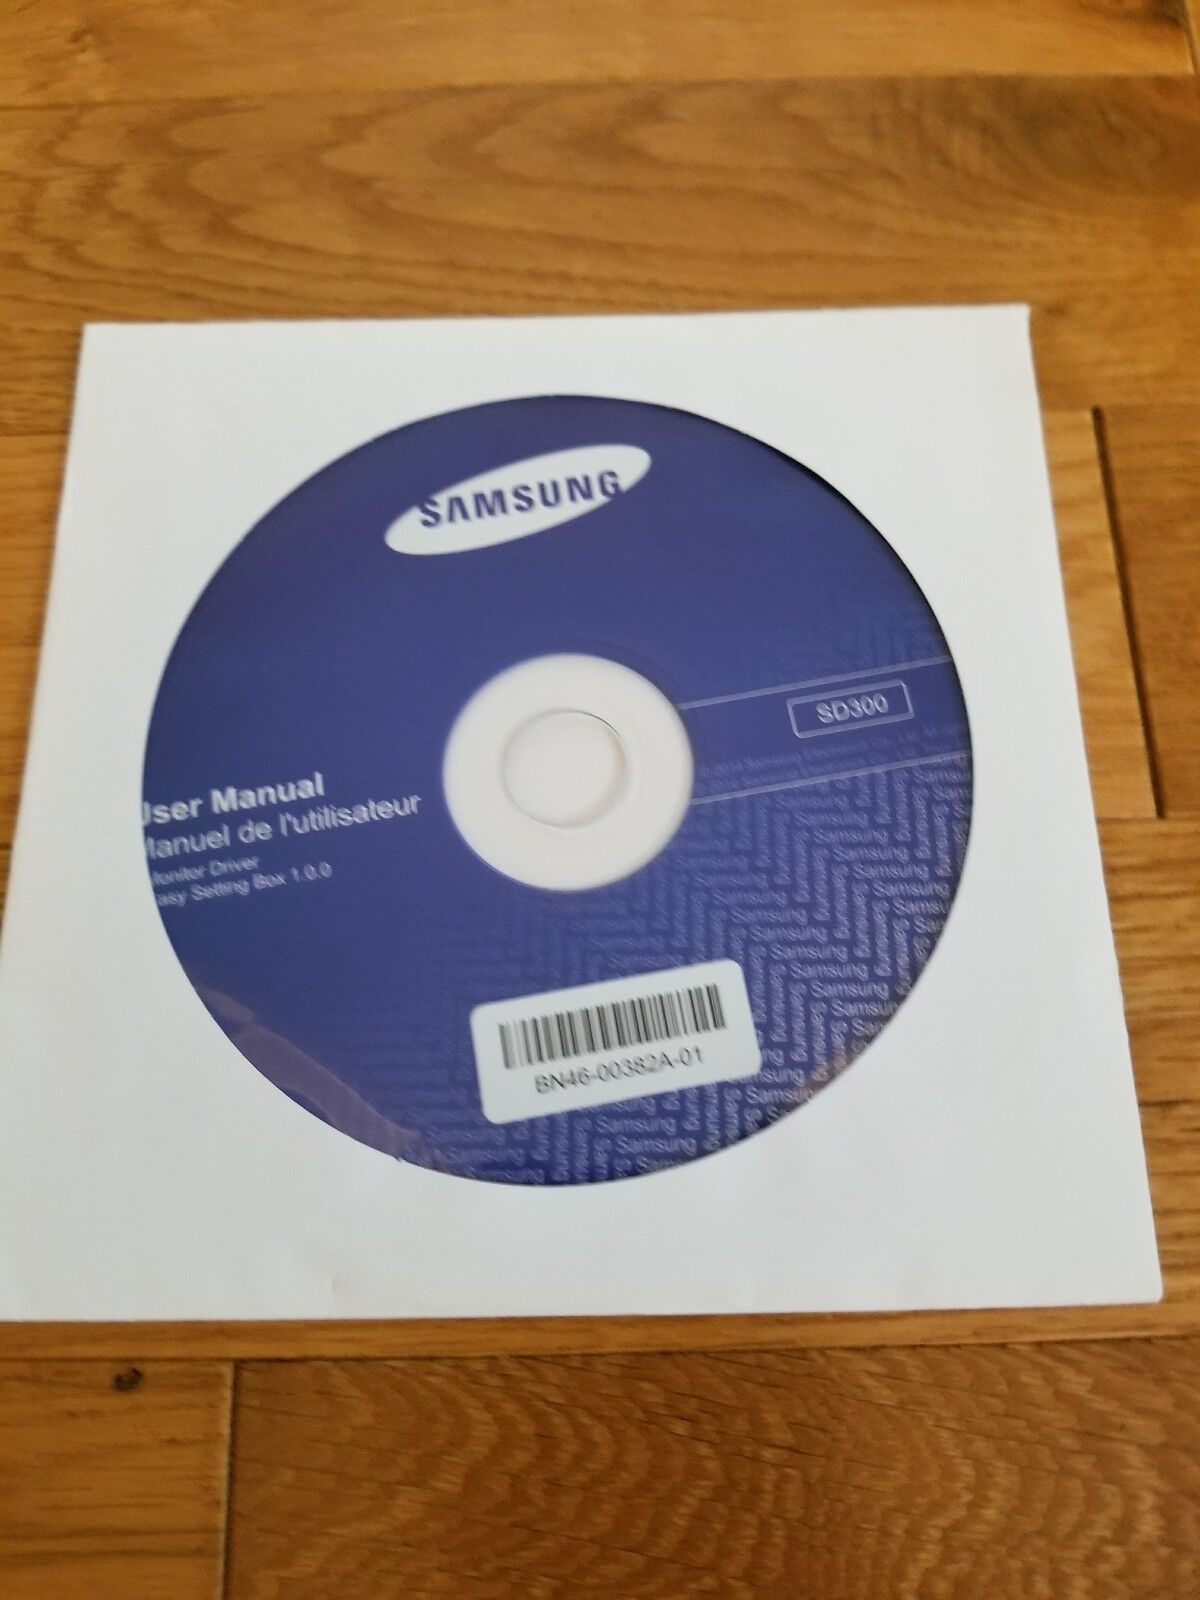 SAMSUNG USER MANUAL MONITOR DRIVER SD300 NEW NEVER USED EASY SETTING BOX 1.0